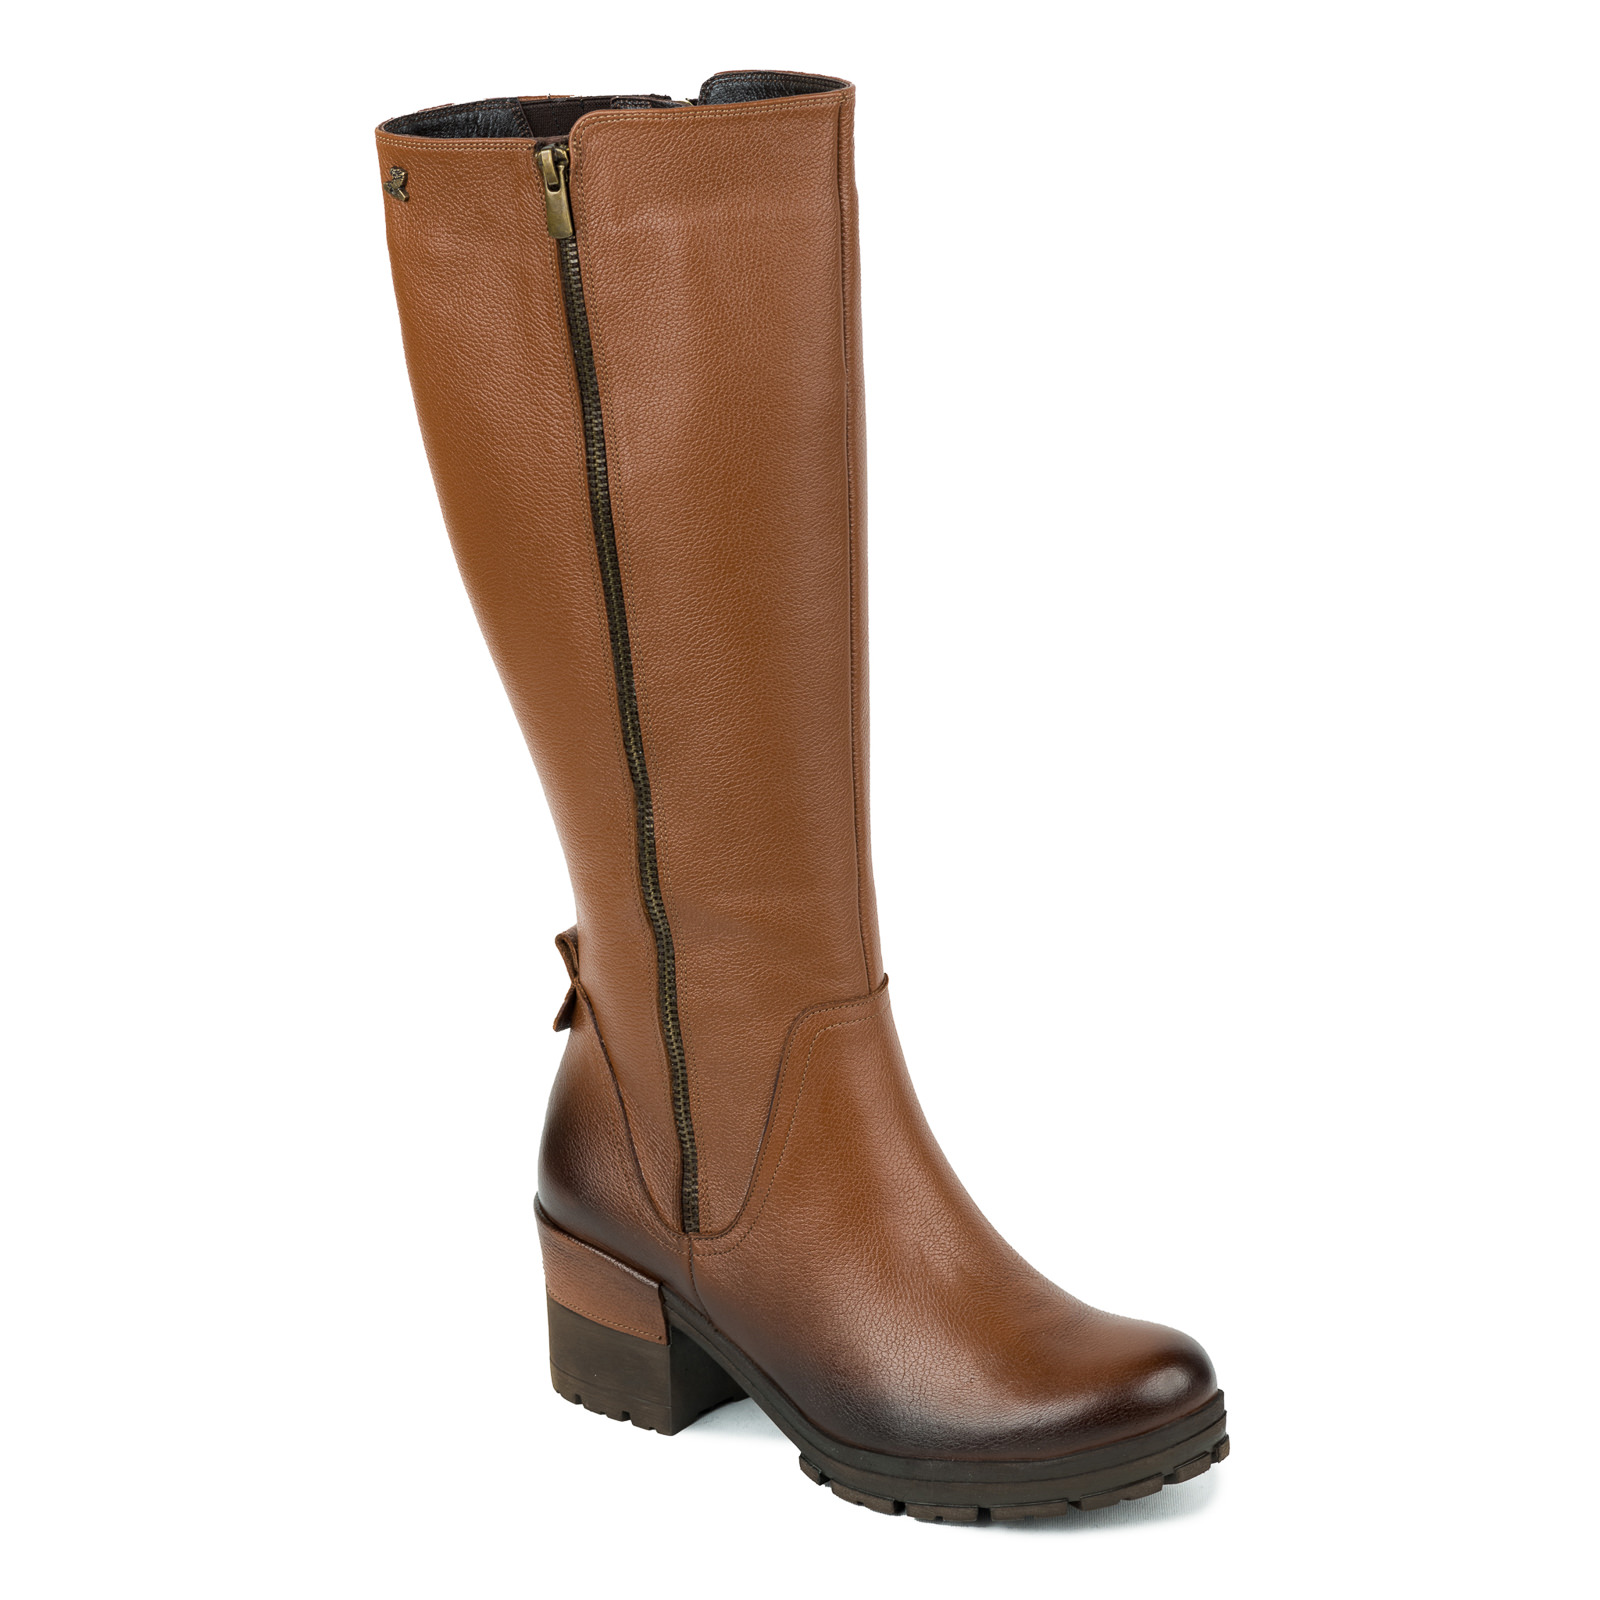 Leather boots B635 - CAMEL